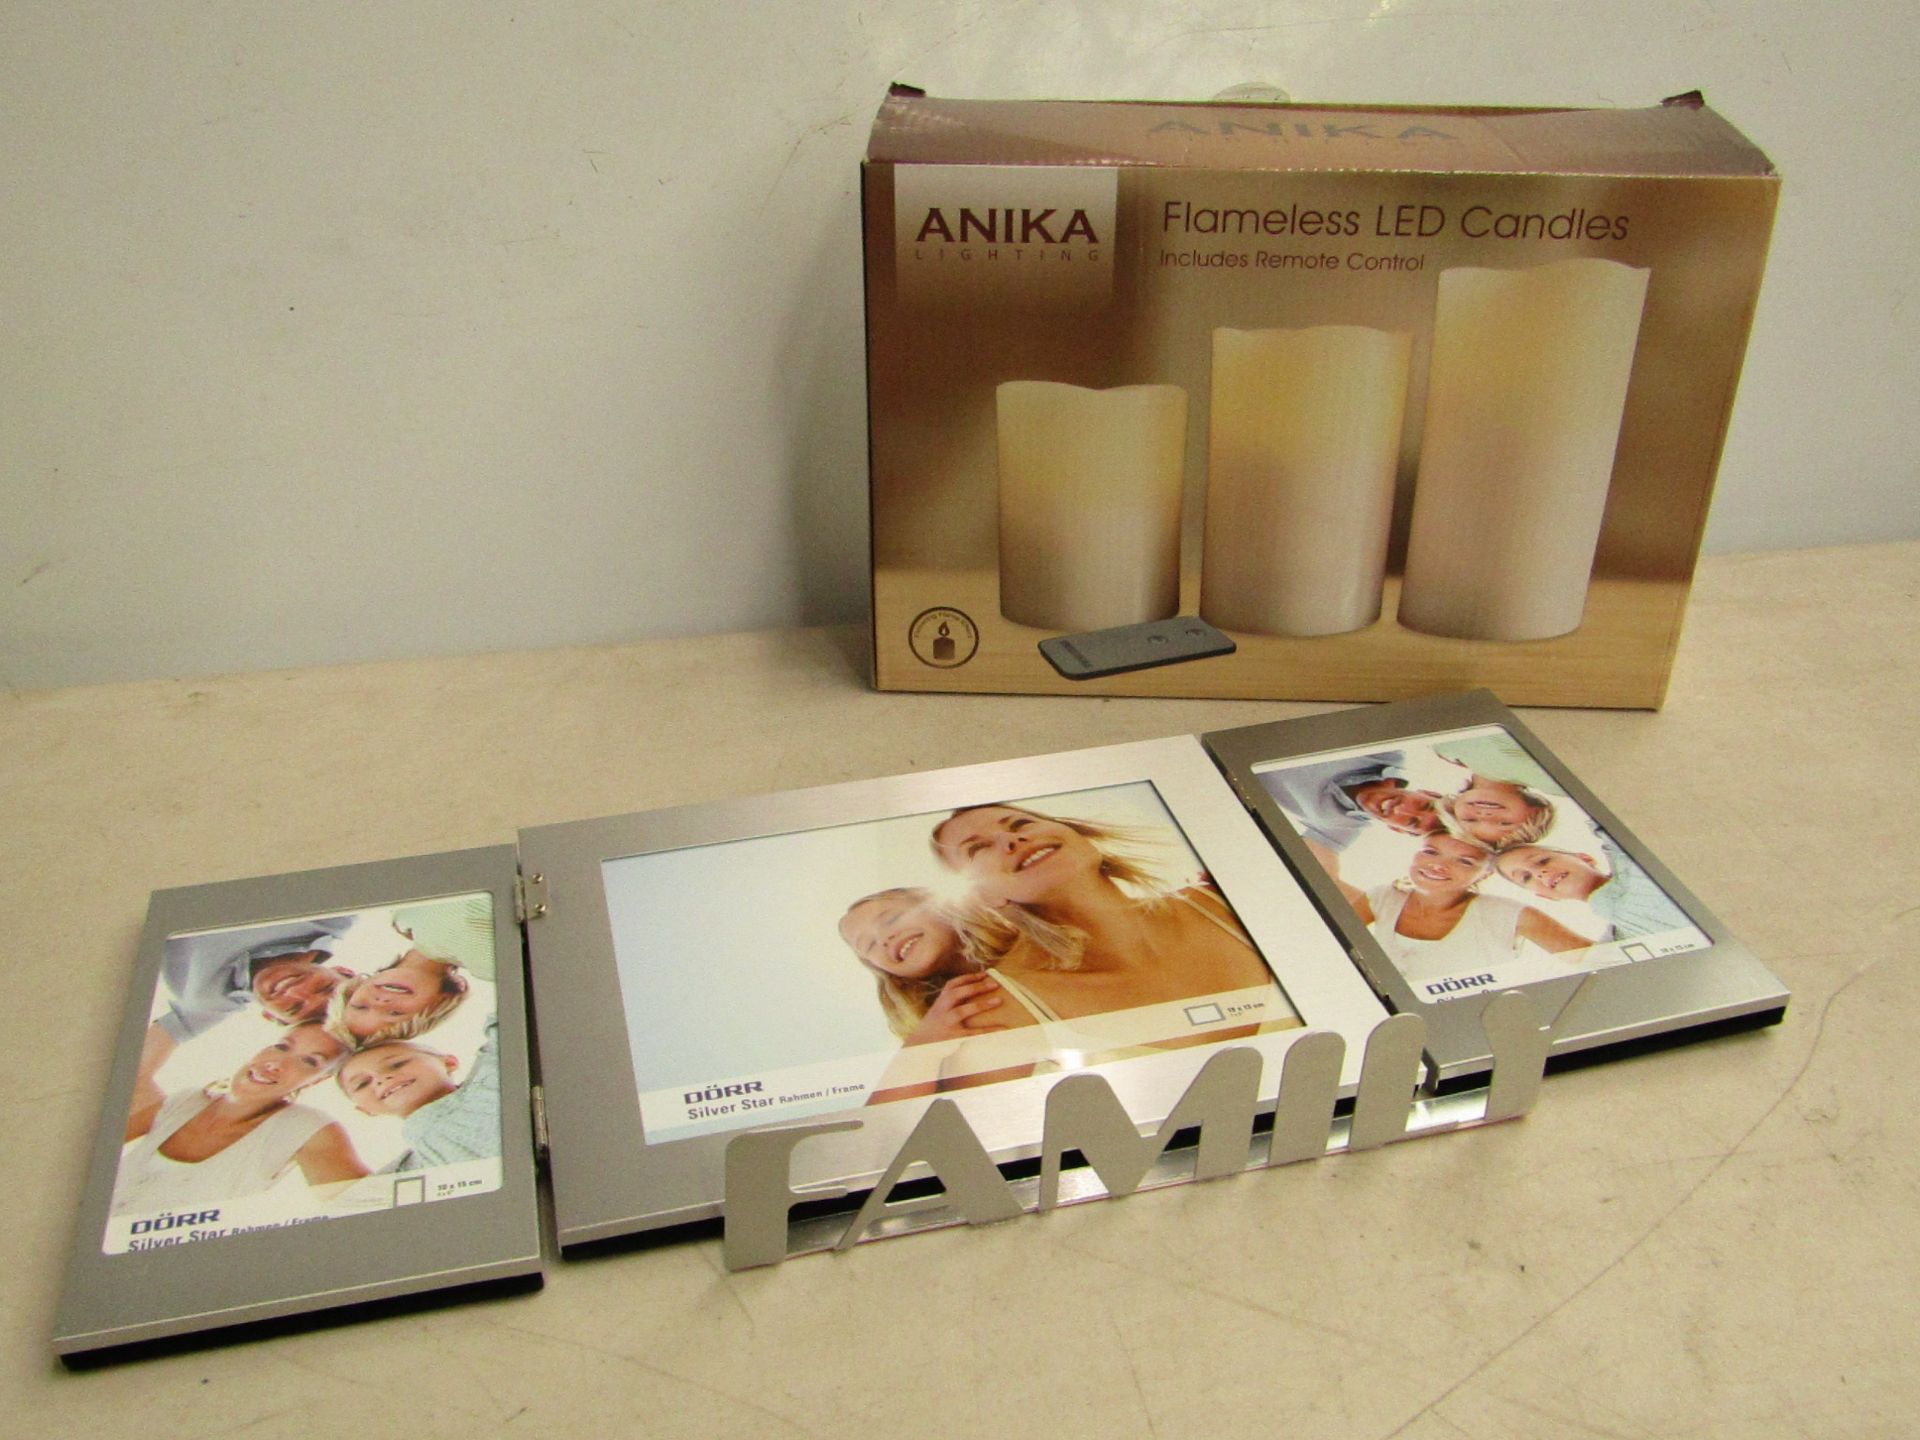 Anika flameless LED candle, unchecked and boxed.